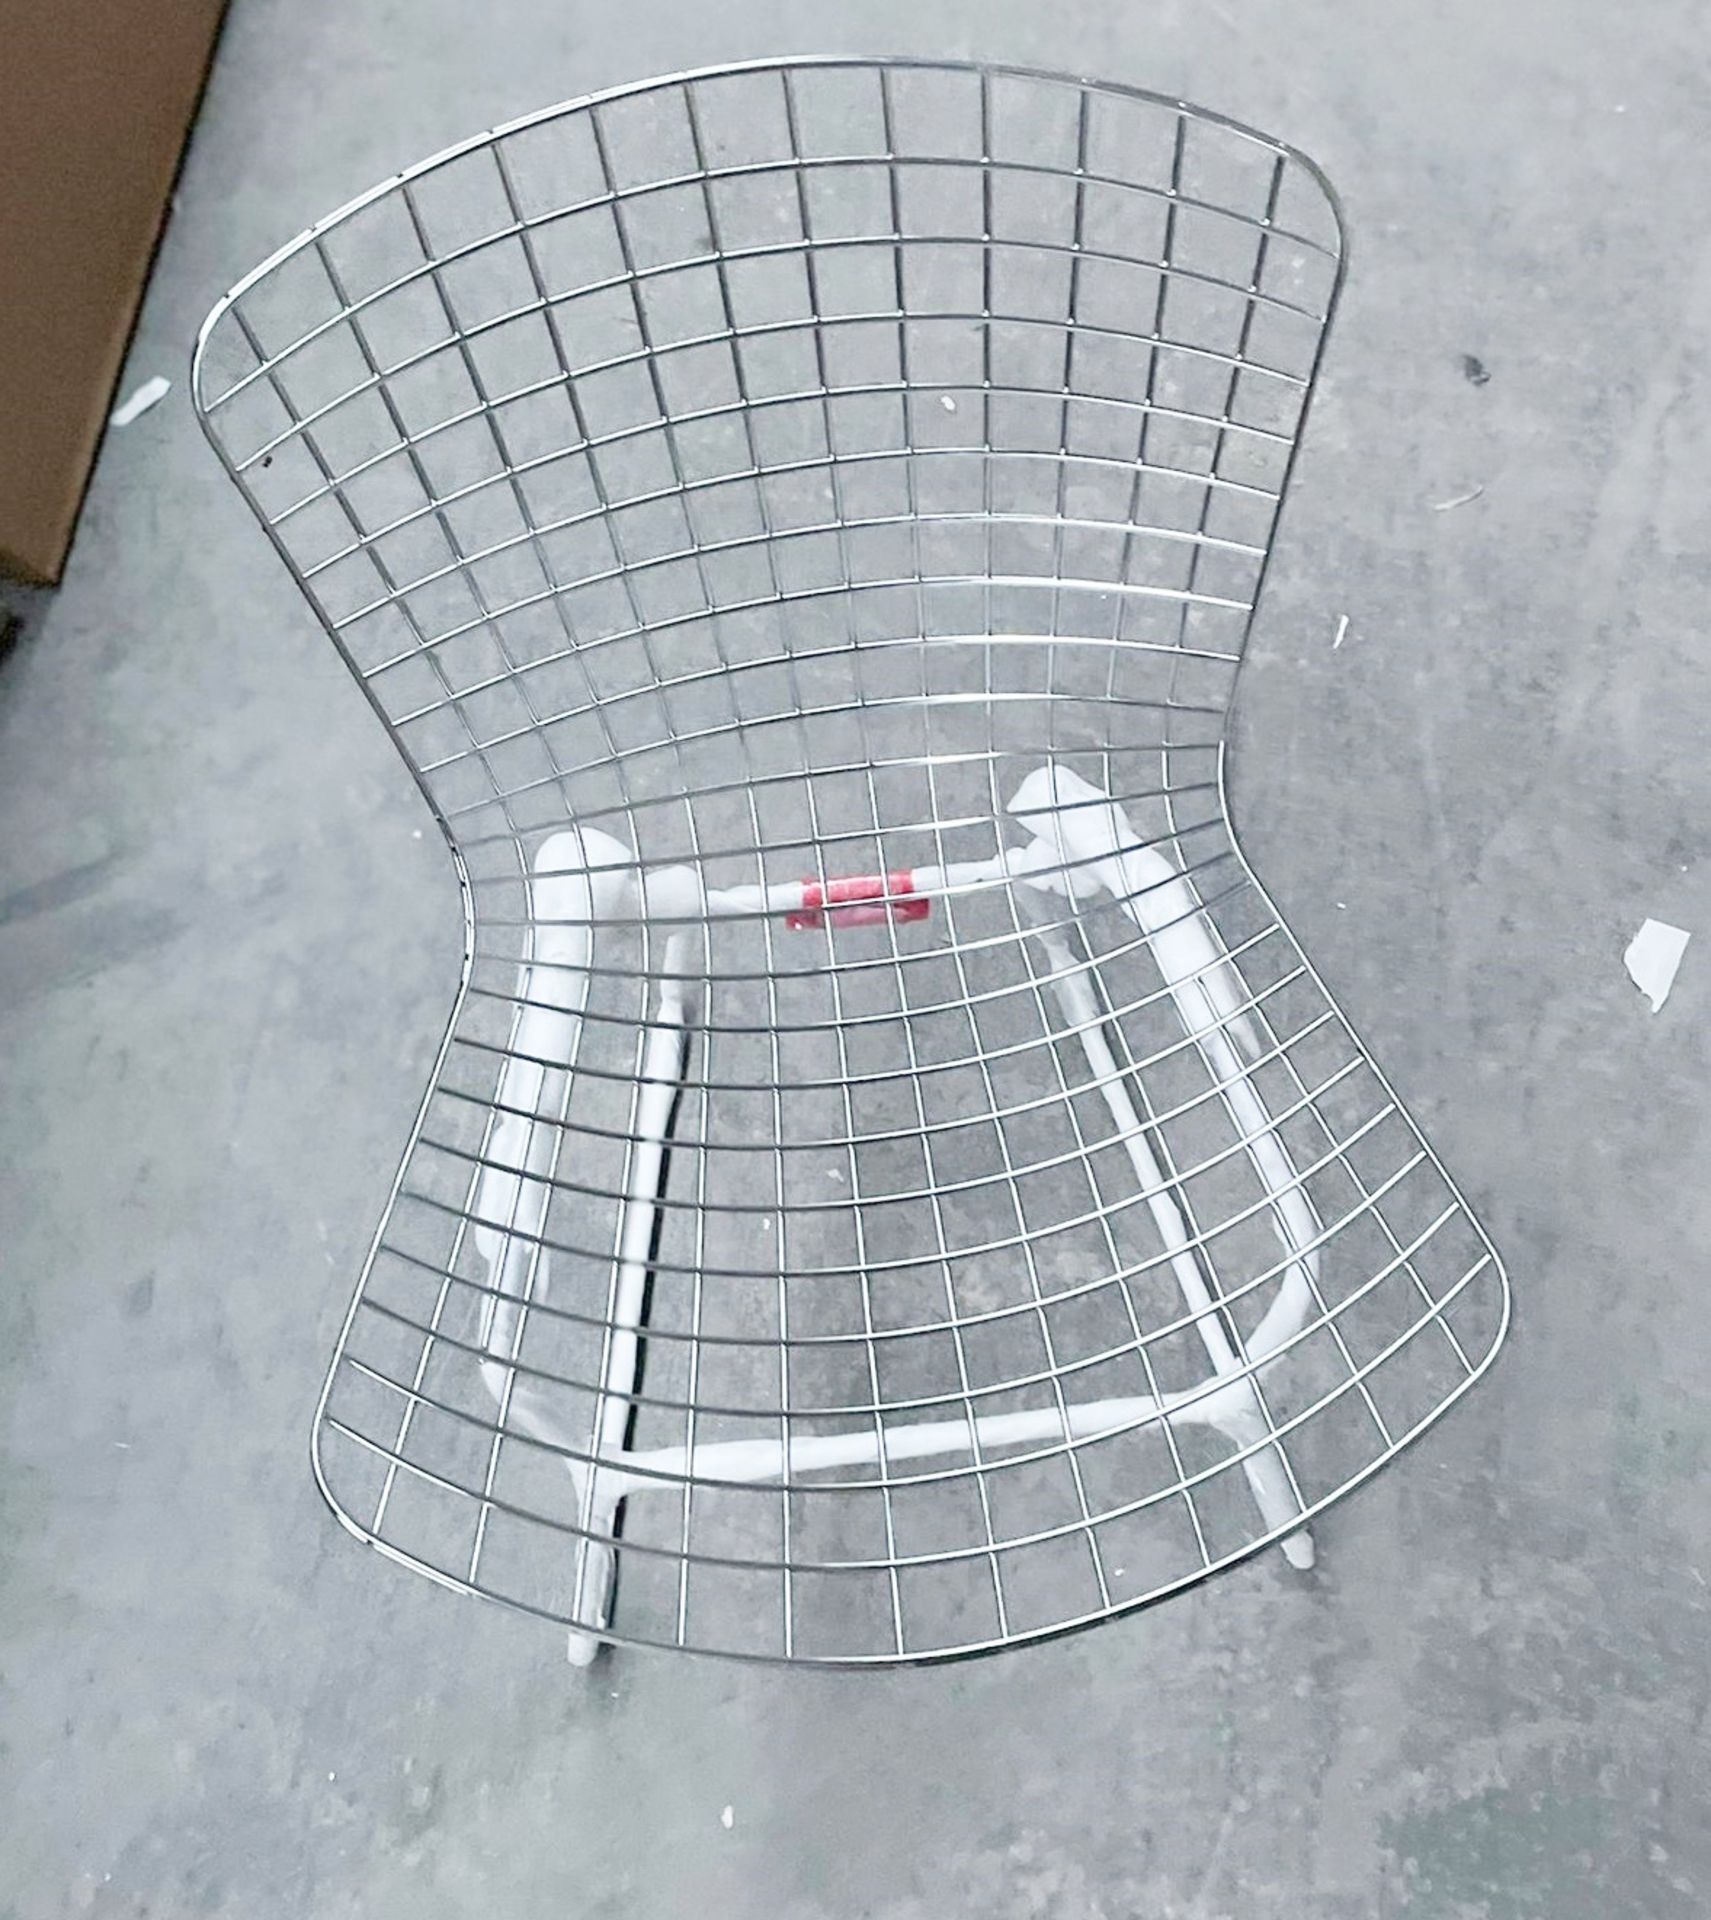 3 x Cubic Side Designer-Inspired Chair With Chrome Frame - Dimensions: 78(h) x 501(d) x 50(w) - Image 5 of 5